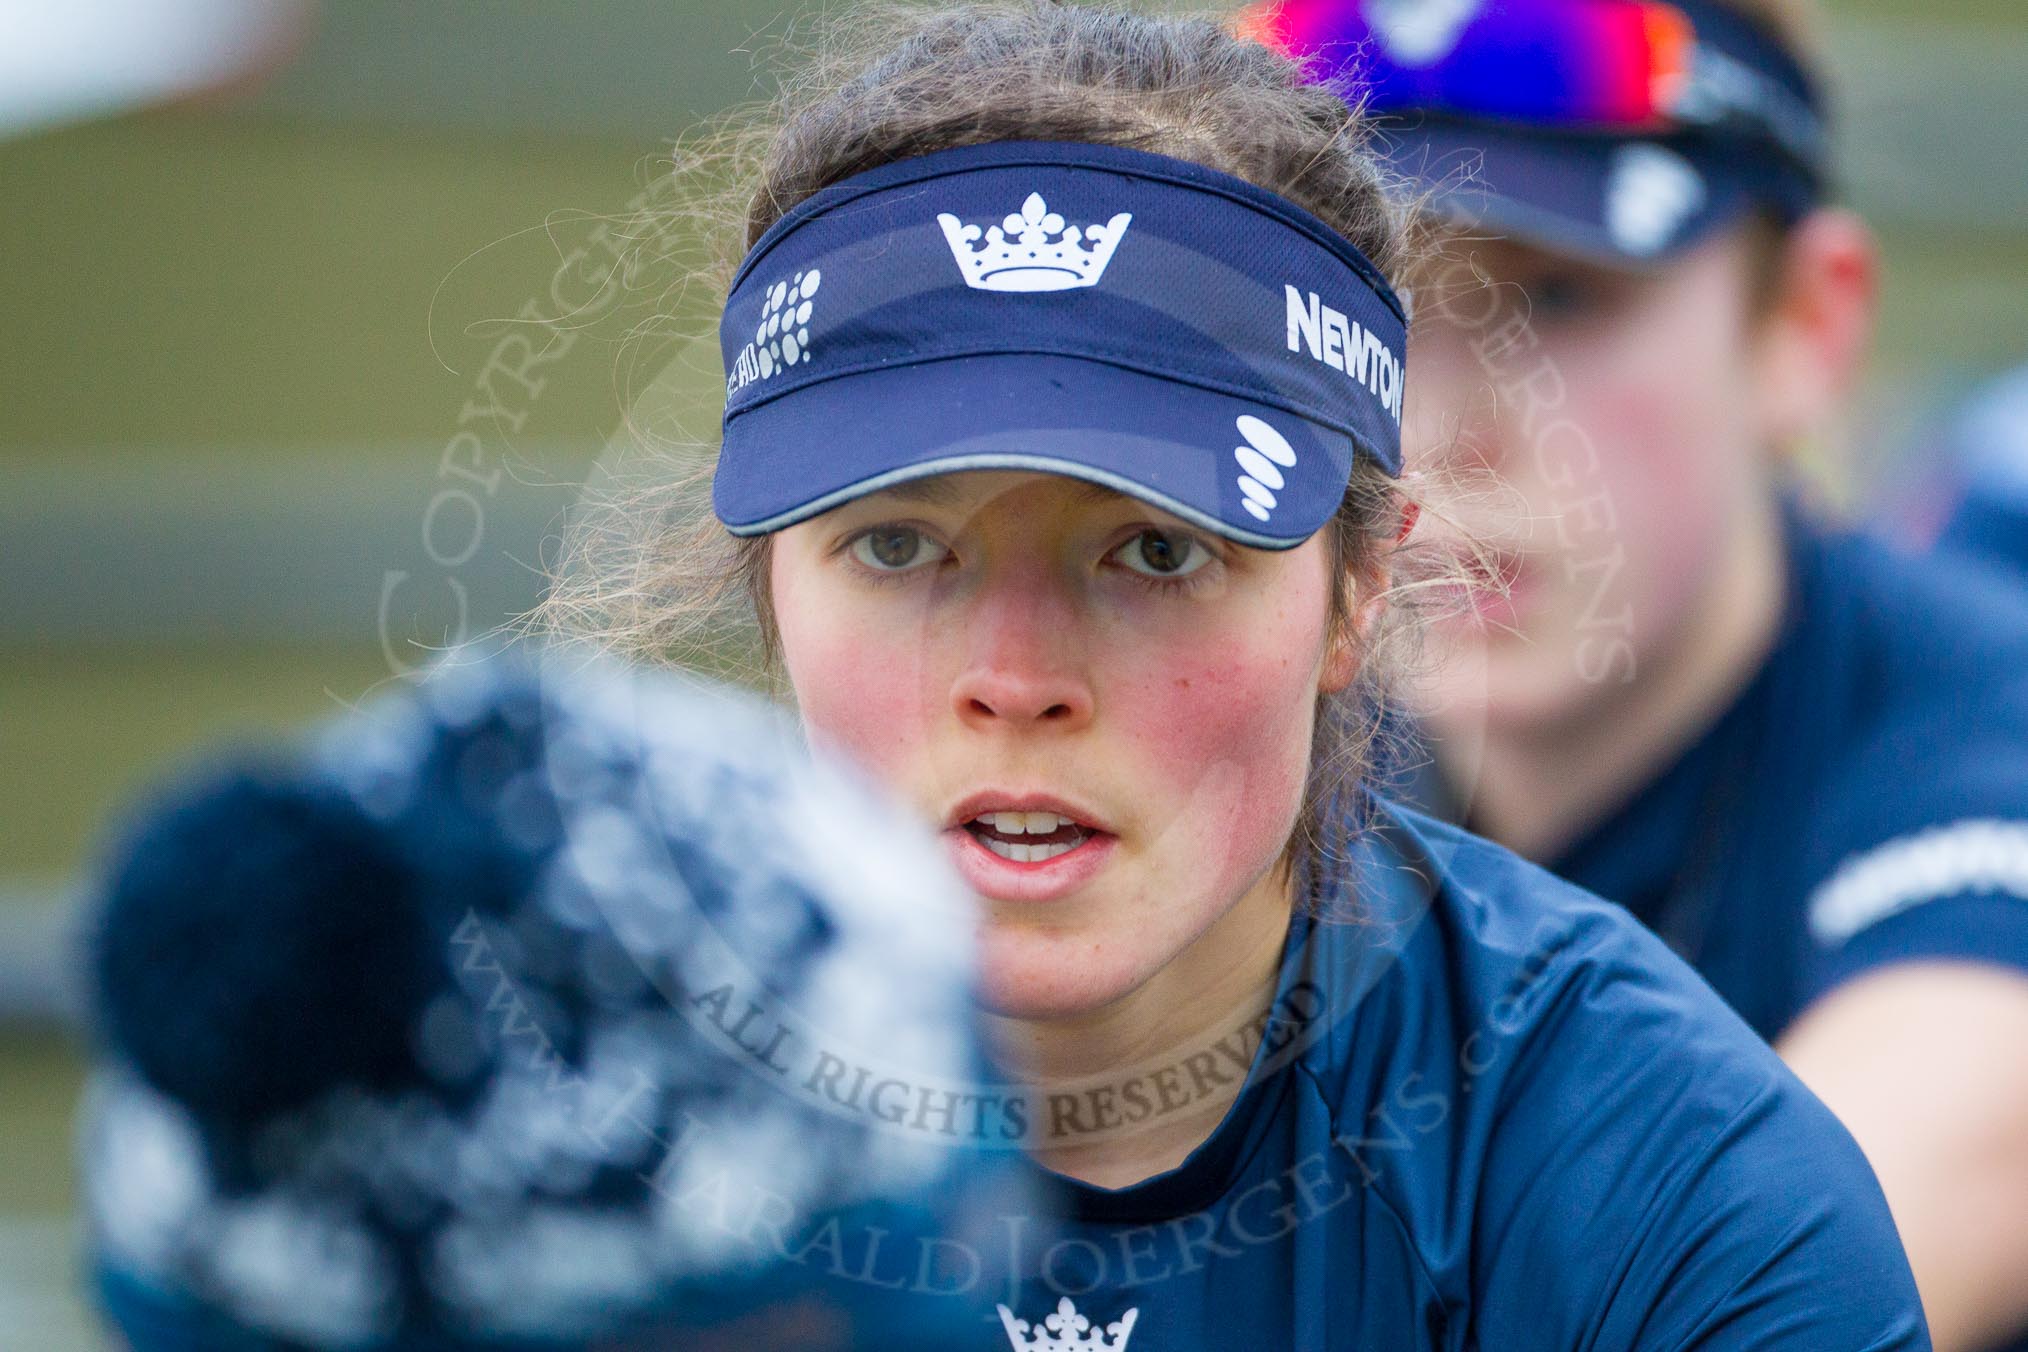 The Boat Race season 2016 - OUWBC training Wallingford: Lauren Kedar, stroke in the OUWBC Blue Boat.
River Thames,
Wallingford,
Oxfordshire,

on 29 February 2016 at 16:33, image #139